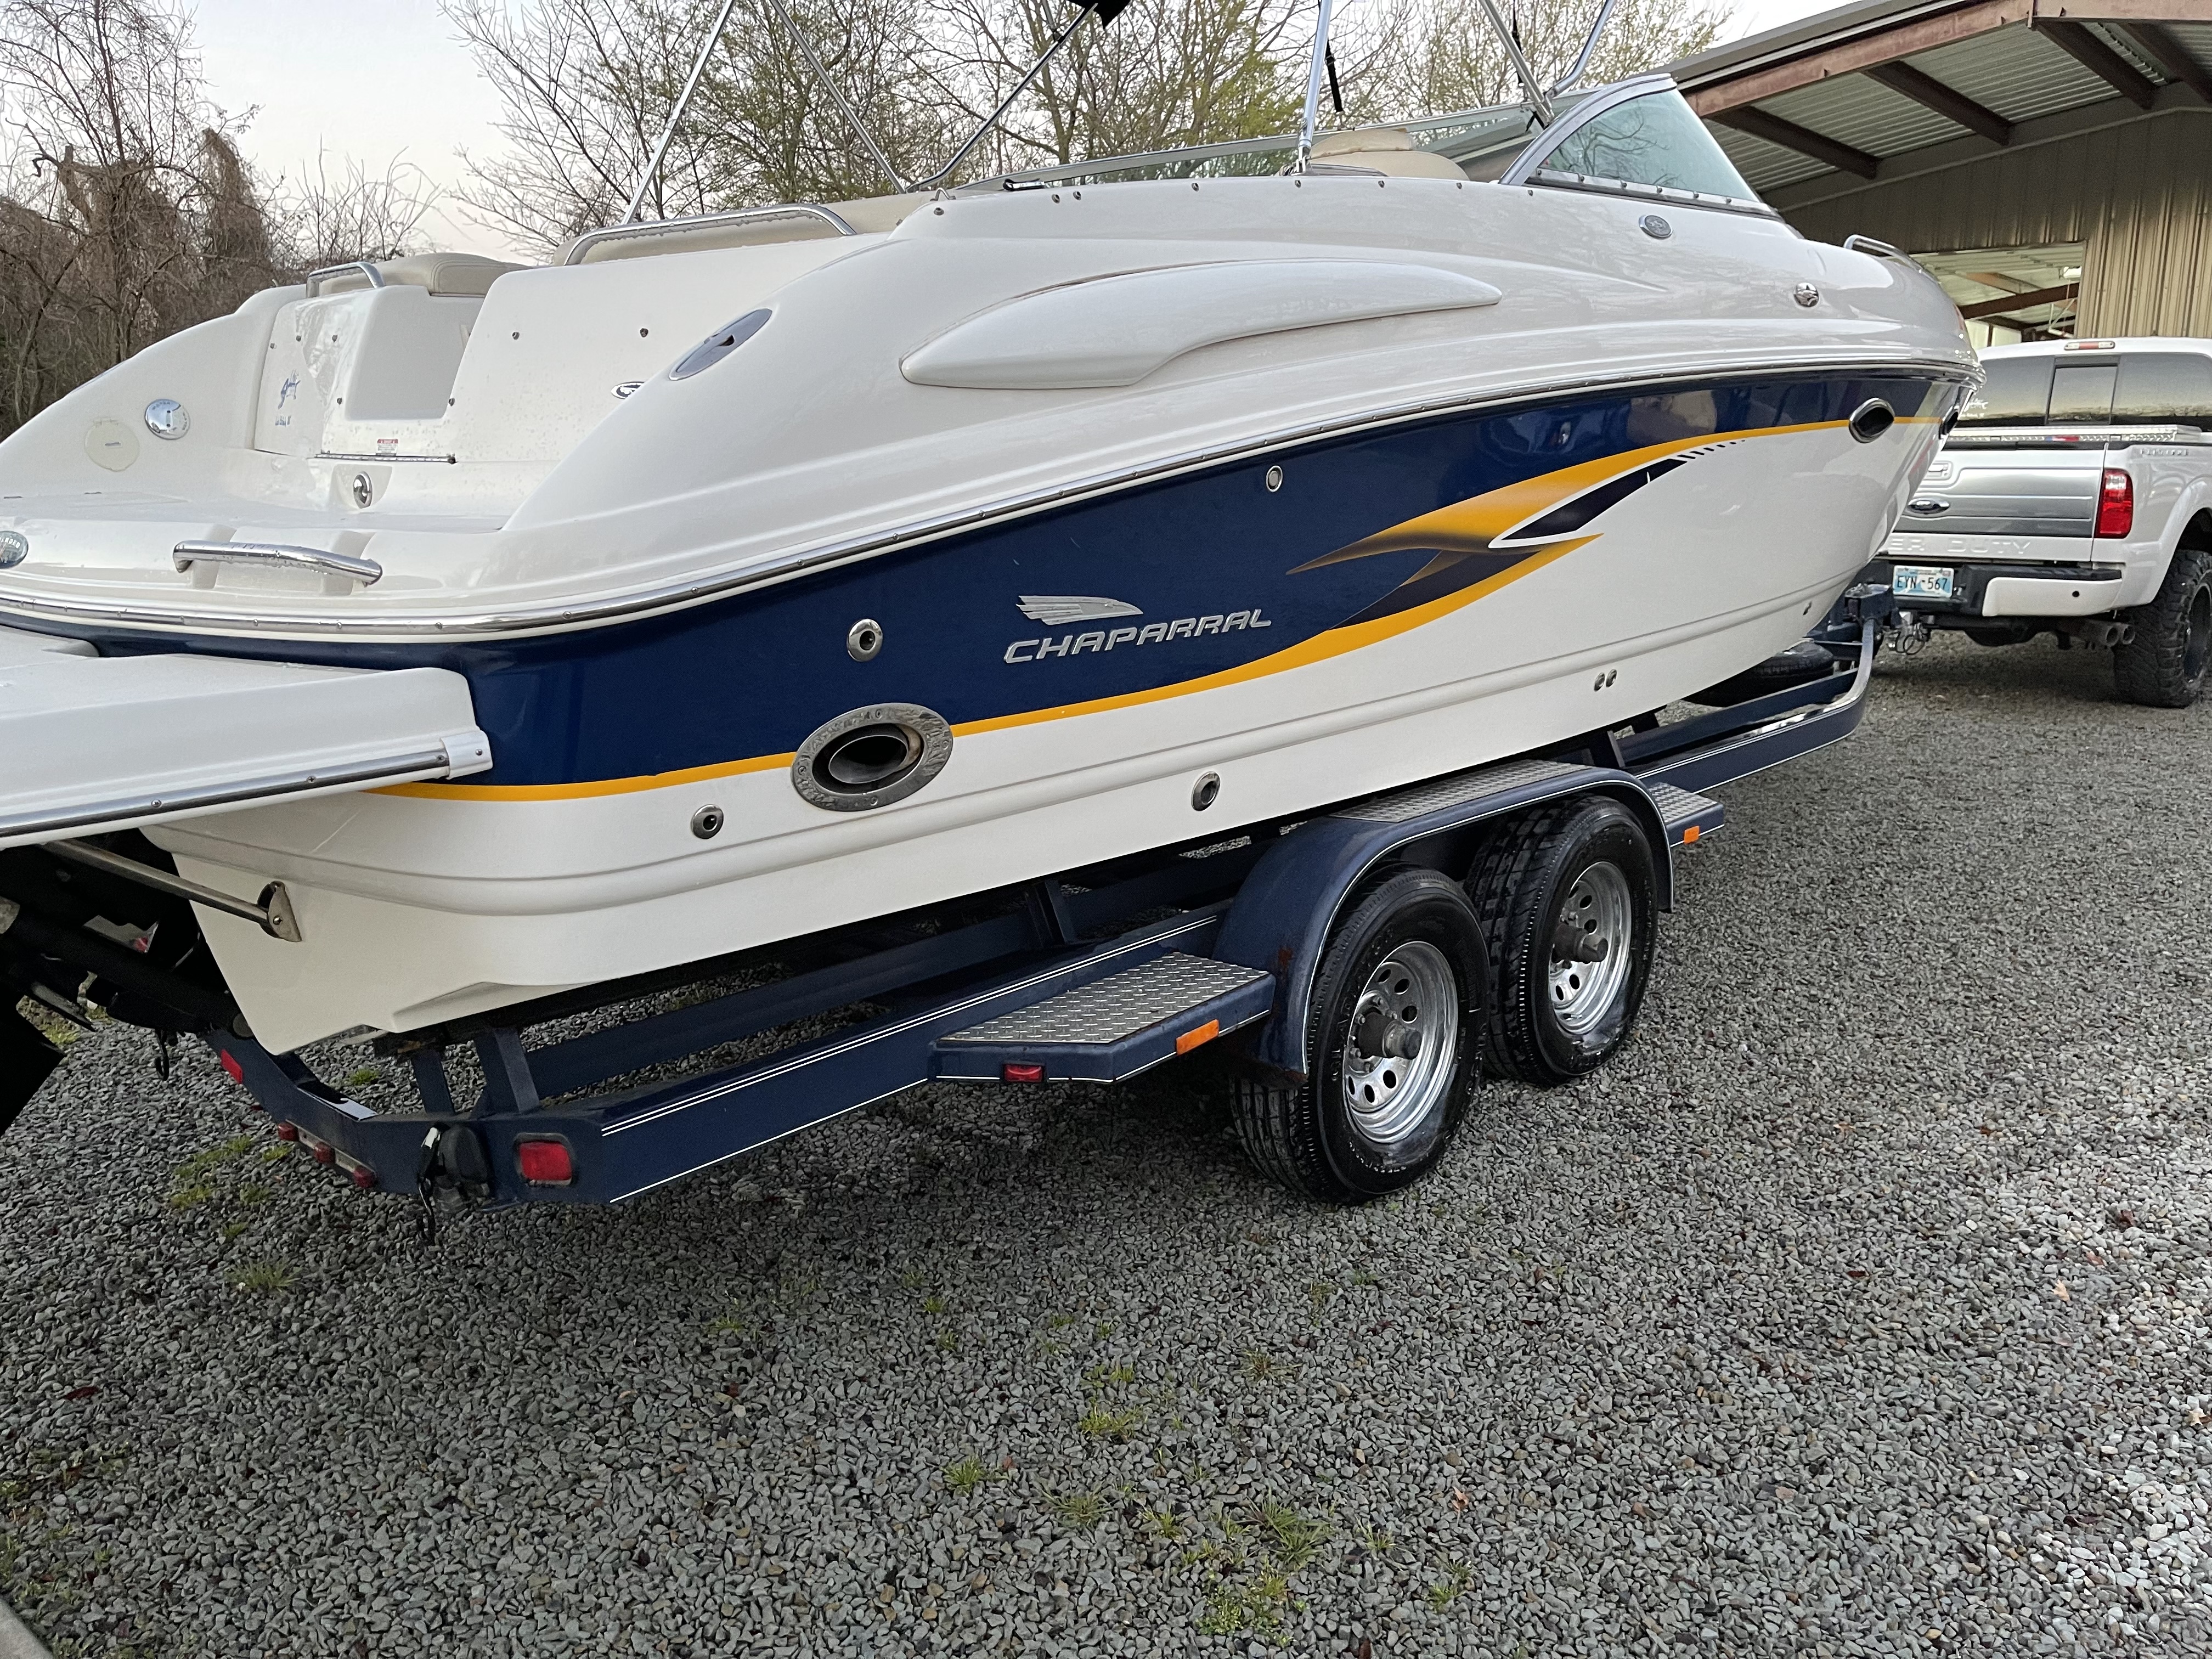 2003 Chaparral 265ssi Power boat for sale in Checotah, OK - image 5 